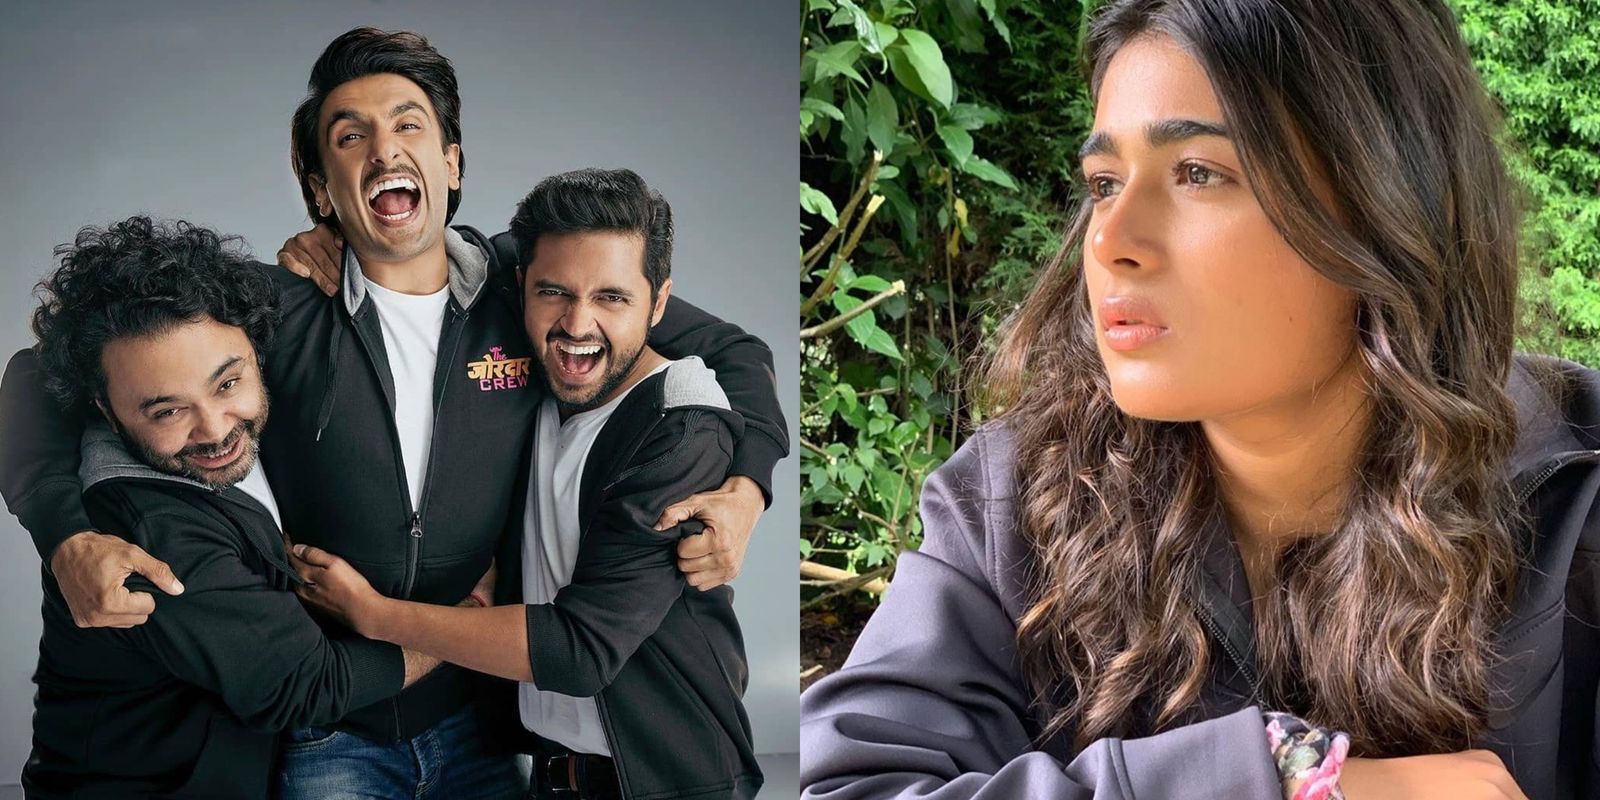 Ranveer Singh's Jayeshbhai Jordaar Co-Star Shalini Pandey Stumped Fans' Love For The Actor: The Reality Of His Stardom Hit Me